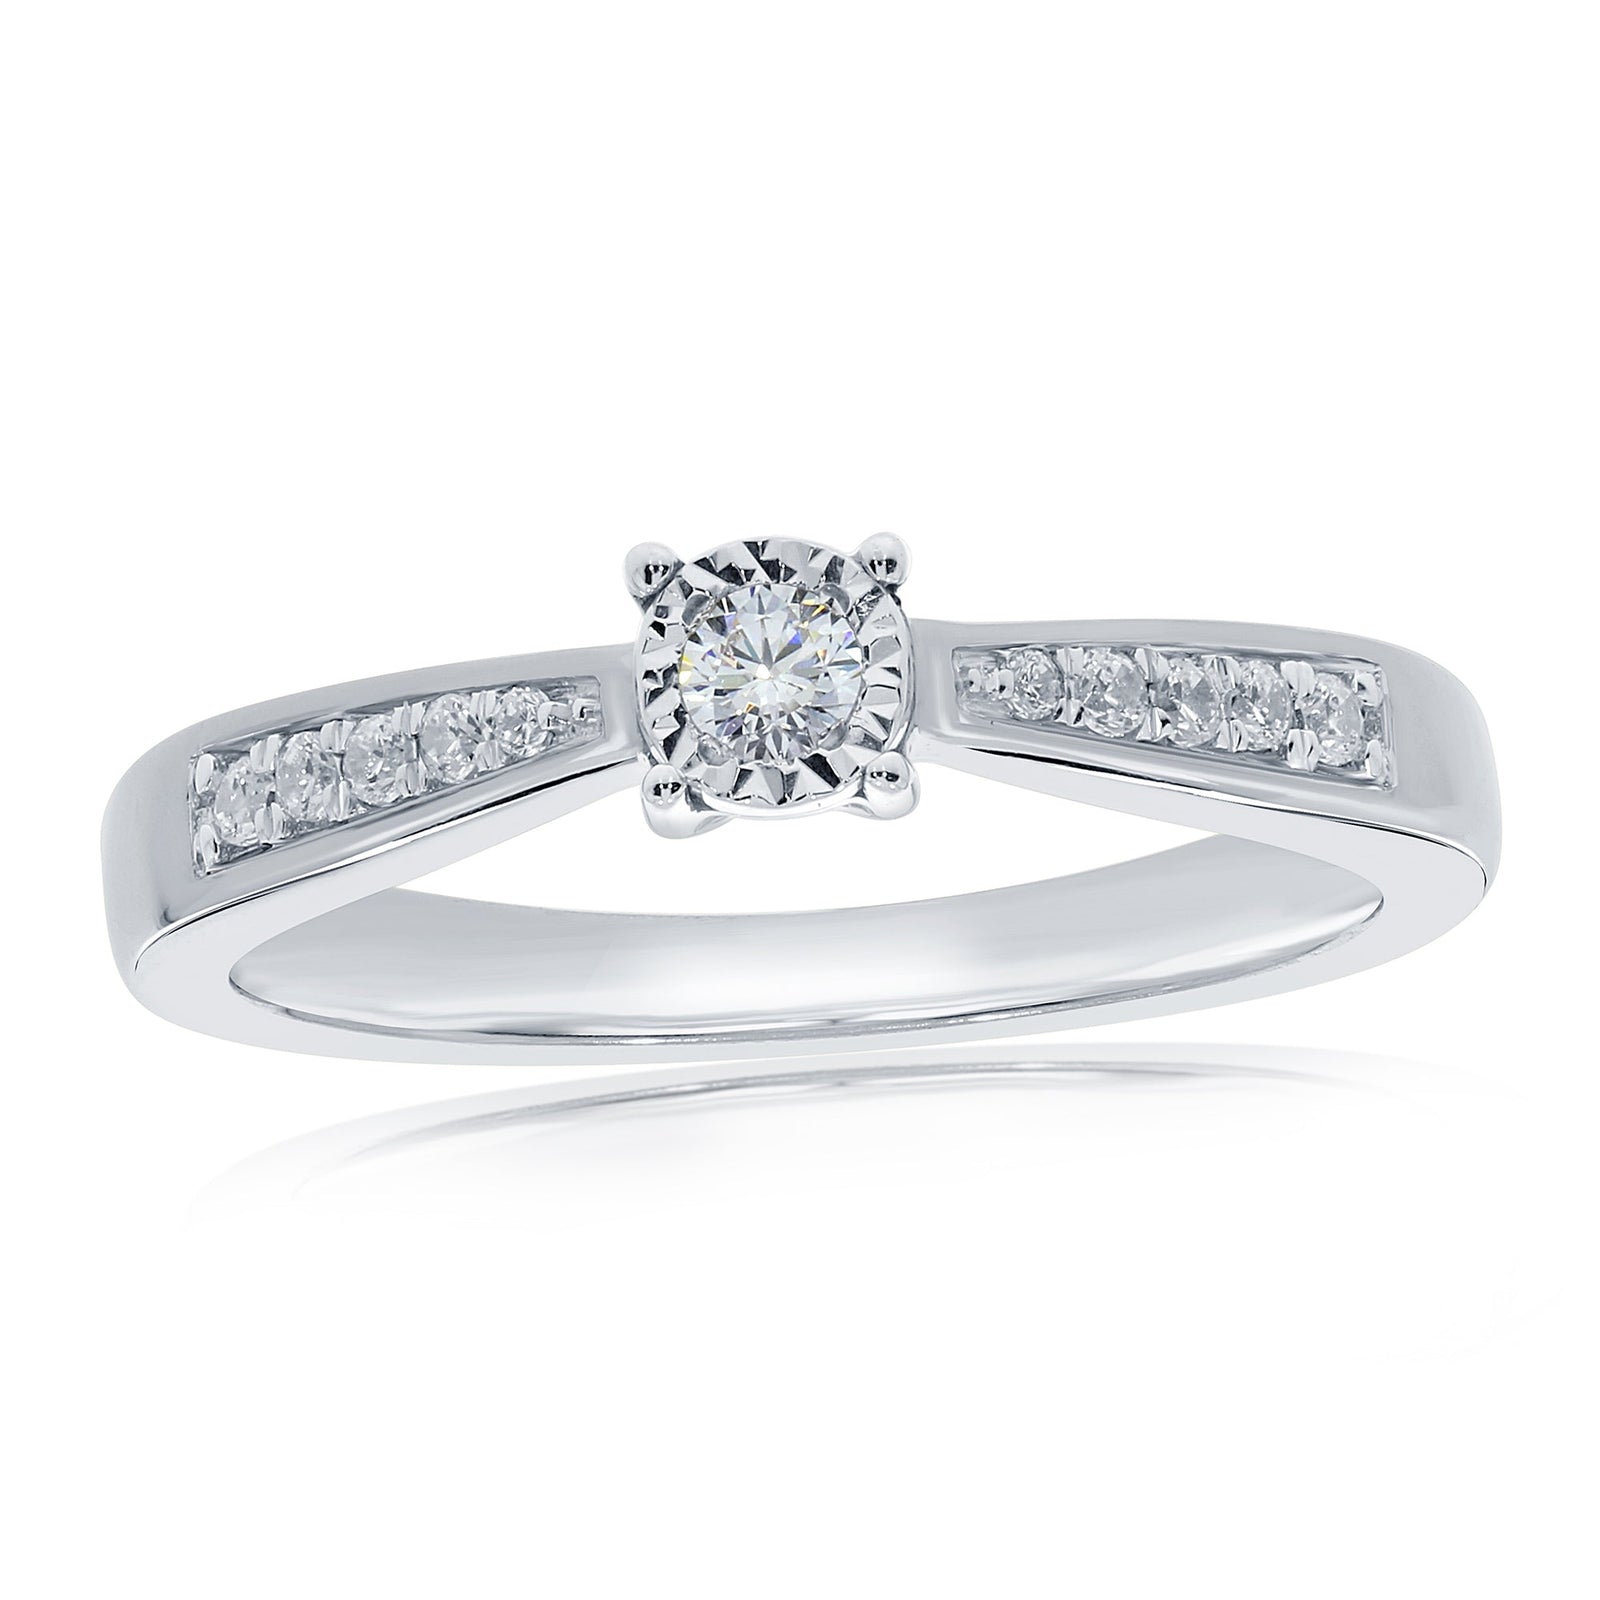 9ct white gold single stone miracle plate diamond ring with diamond set shoulders 0.10ct